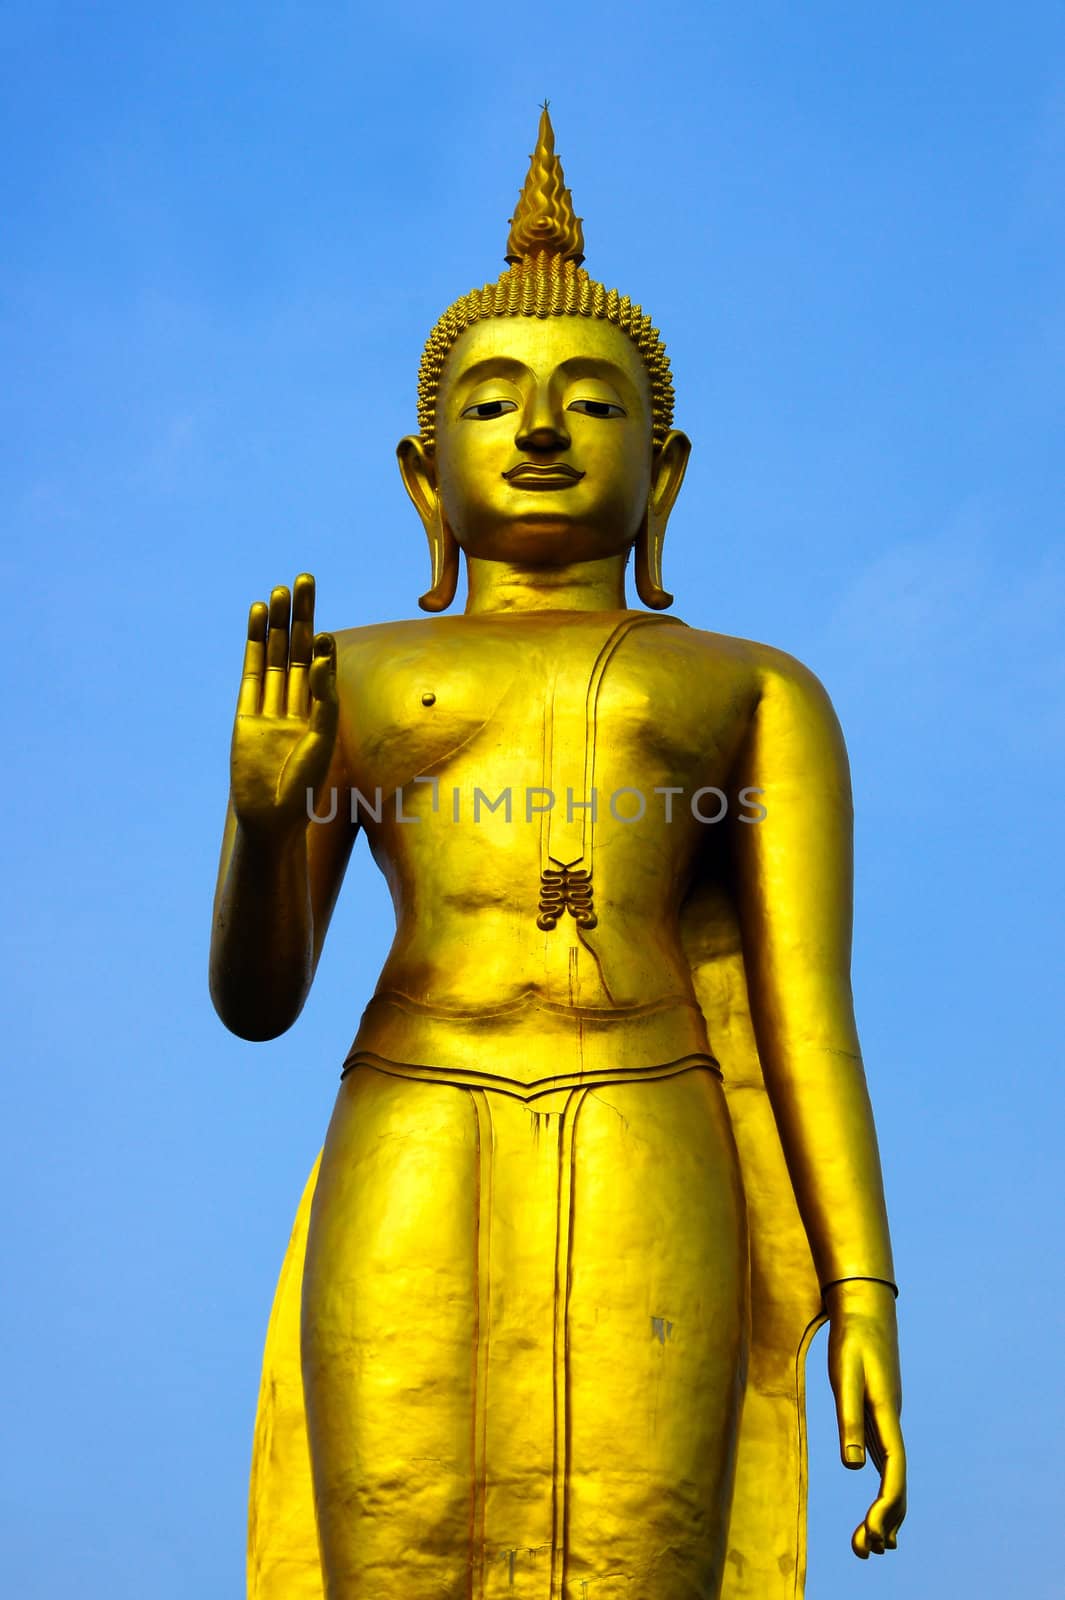 Statue of Buddha in Thailand by Noppharat_th